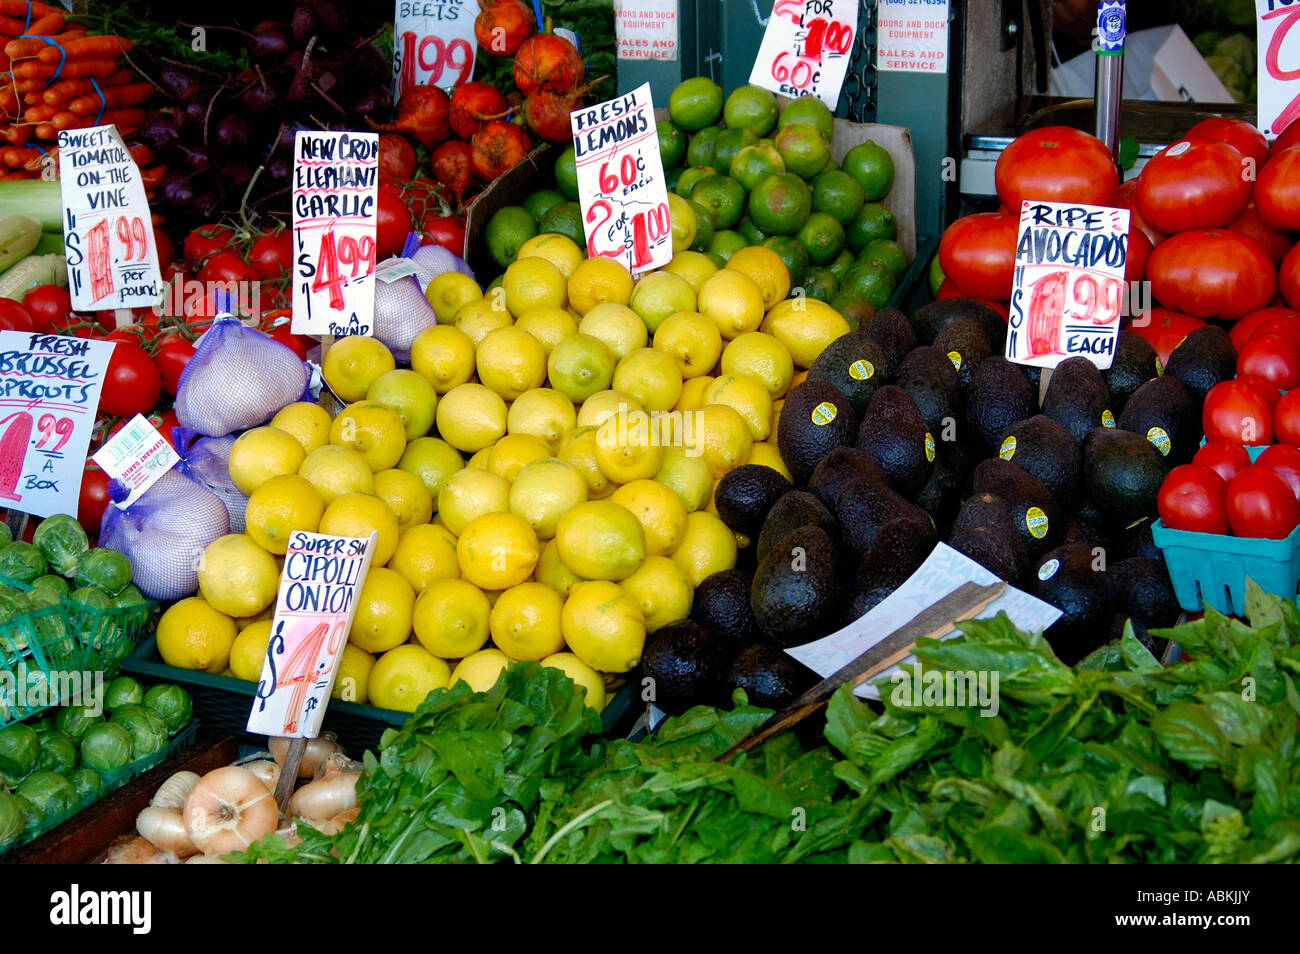 Produce Stand Stock Photo